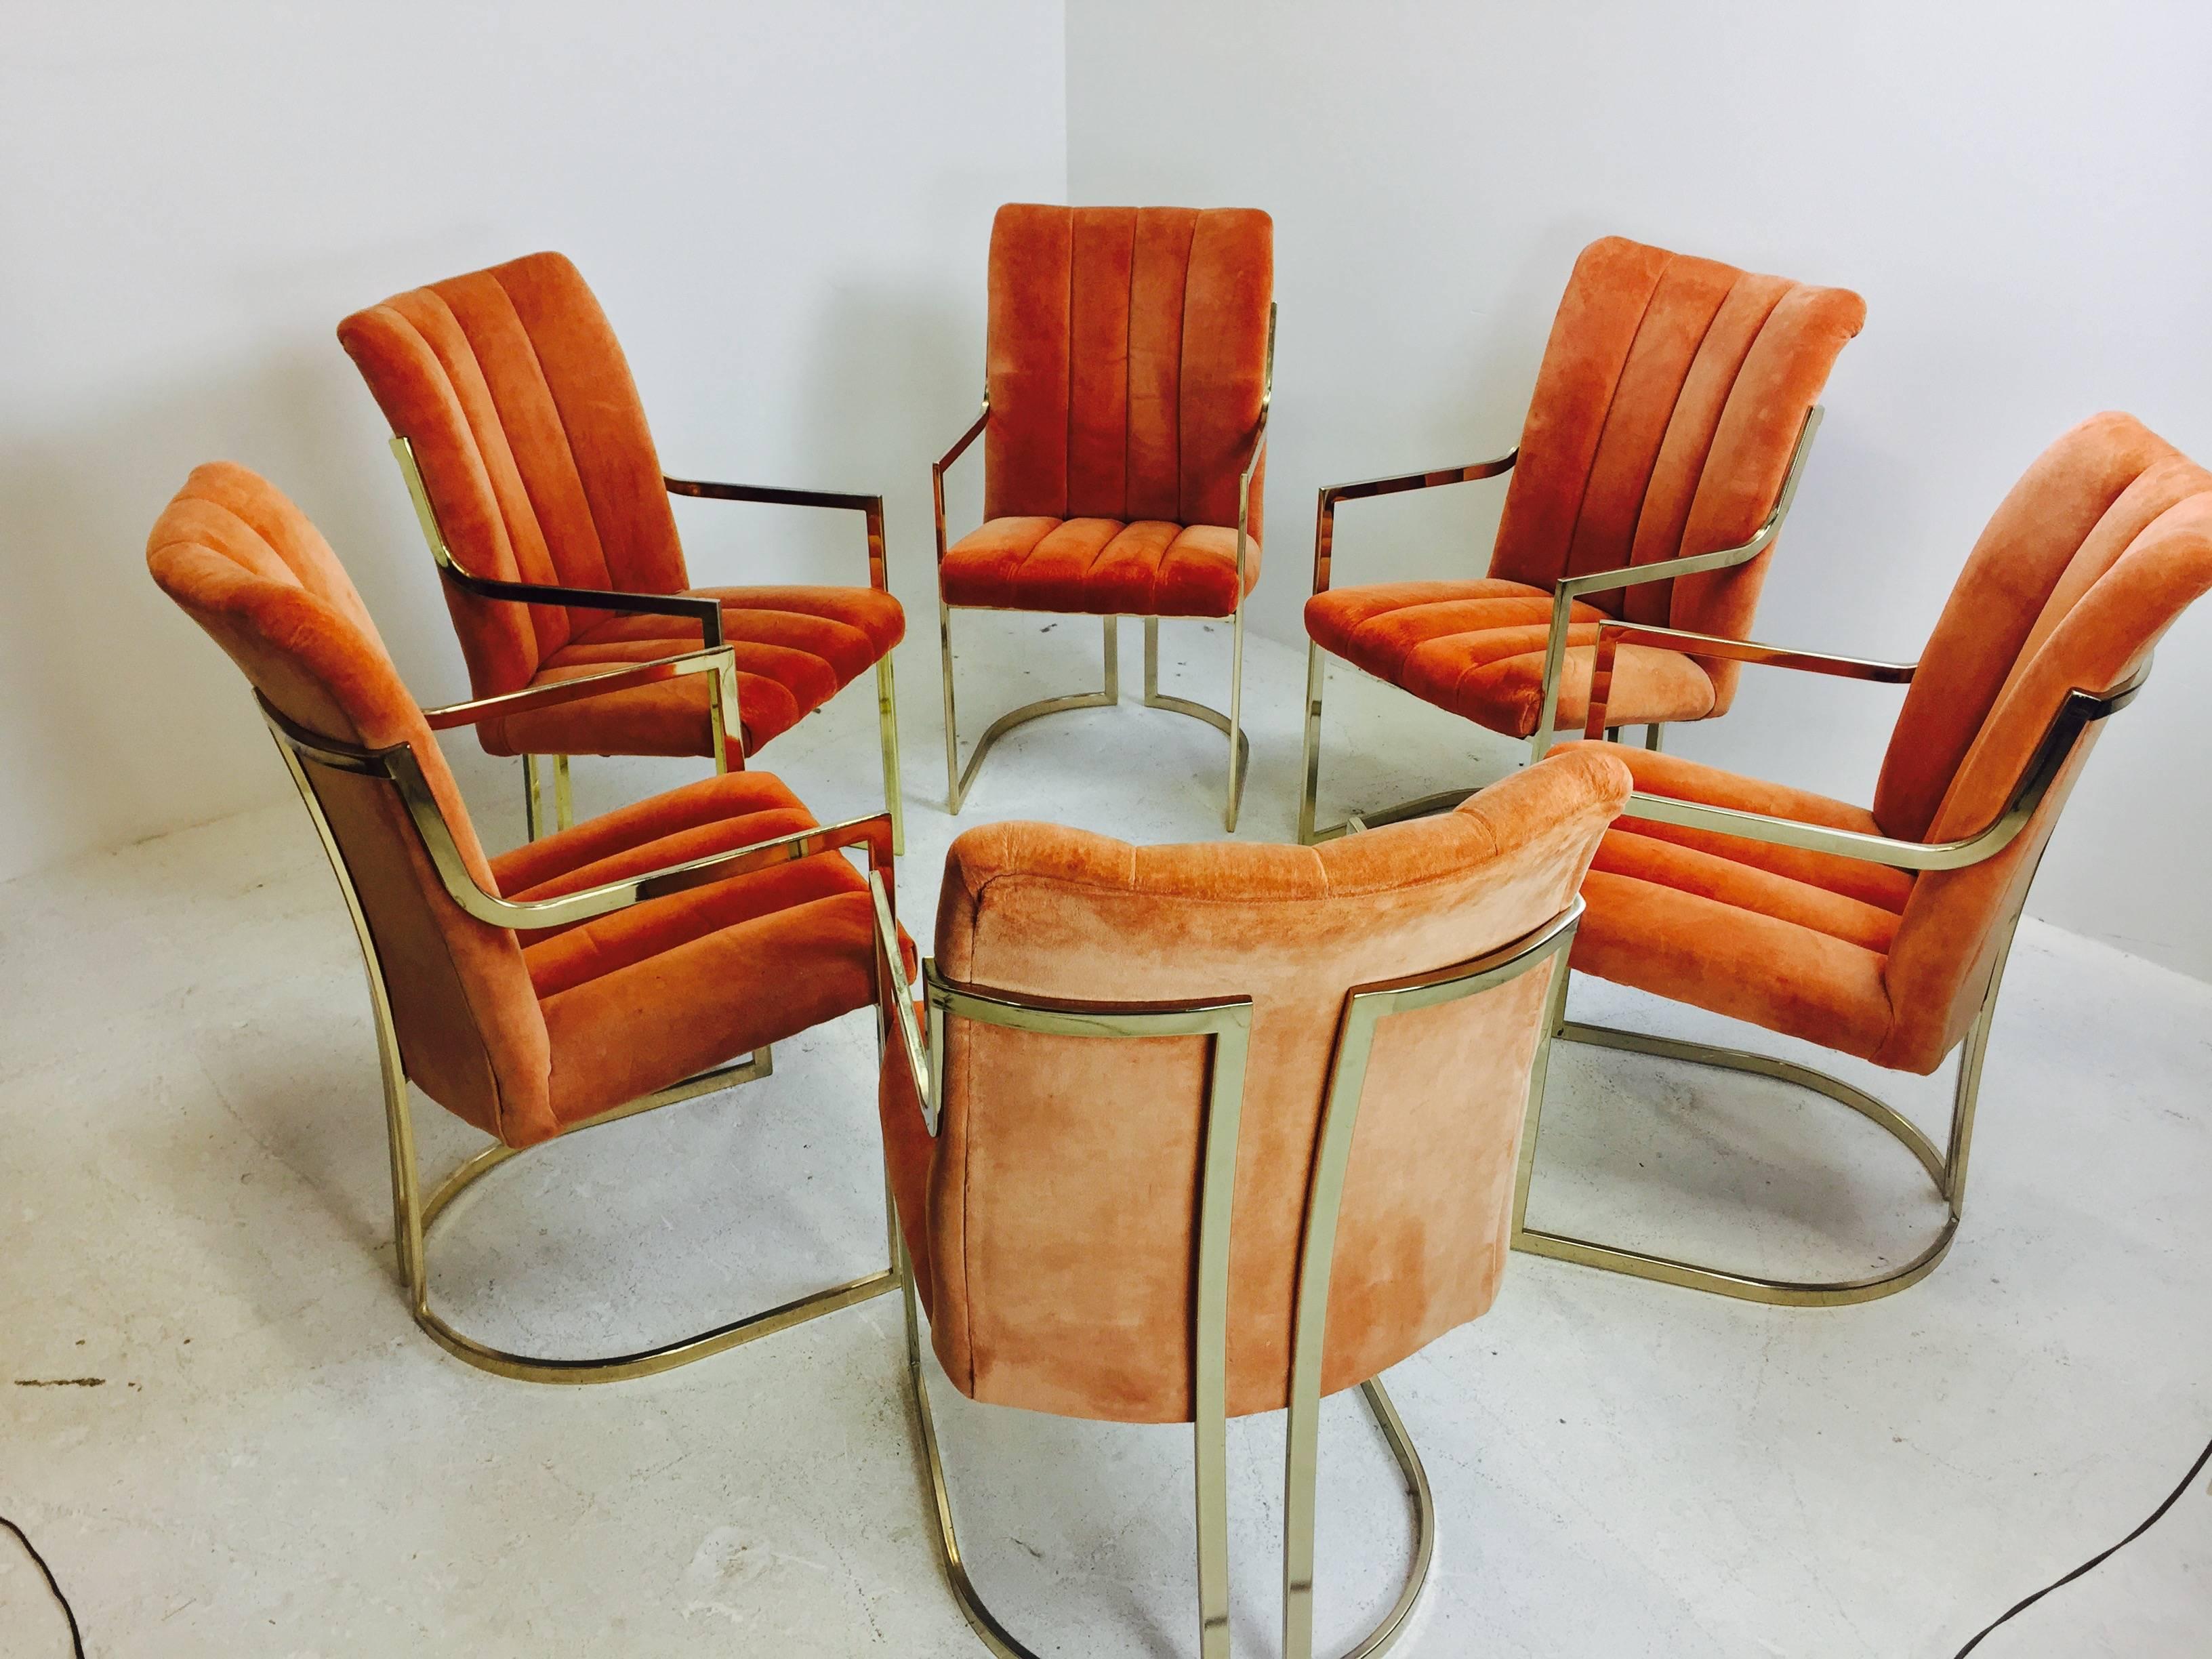 Set of six brass and orange velvet dining chairs by Pierre Cardin. New upholstery and refinishing is recommended, circa 1970s.

Dimensions: 20